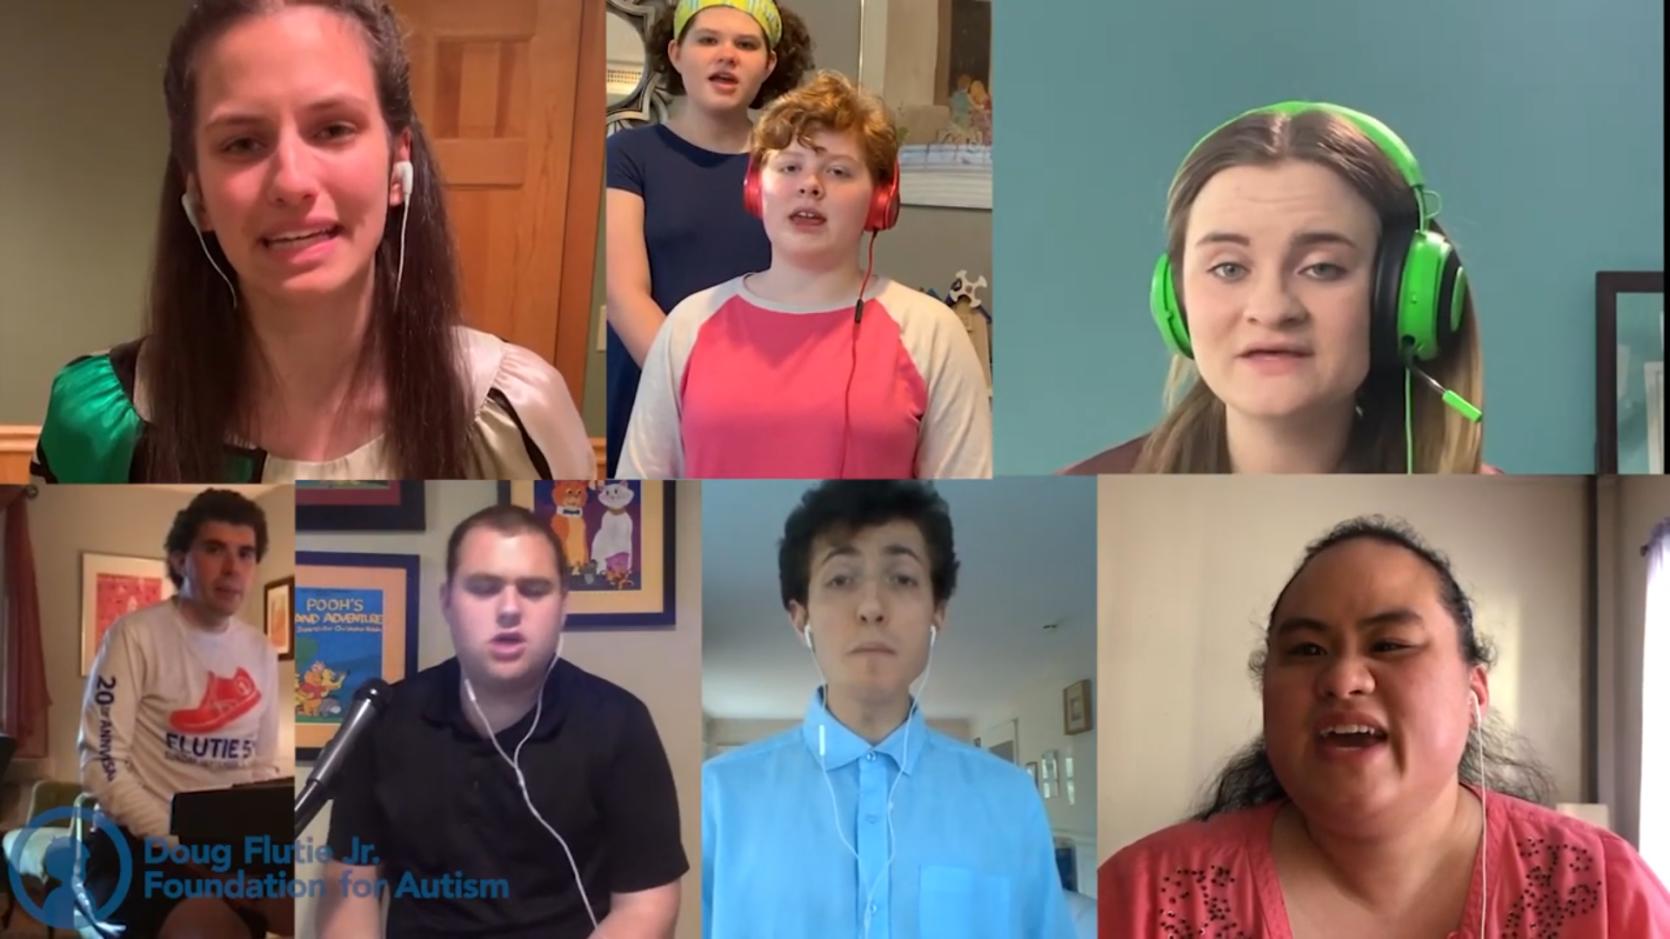 A screenshot of members of the virtual choir Spectrum of Sound performing "Lean on Me." The image shows Jamie Piro, Hana Coppenrath, Helen Coppenrath, Cierra Reynolds, Connor Thompson, Patrick Linehan, Stefano Micali, and Lavender Darcangelo.